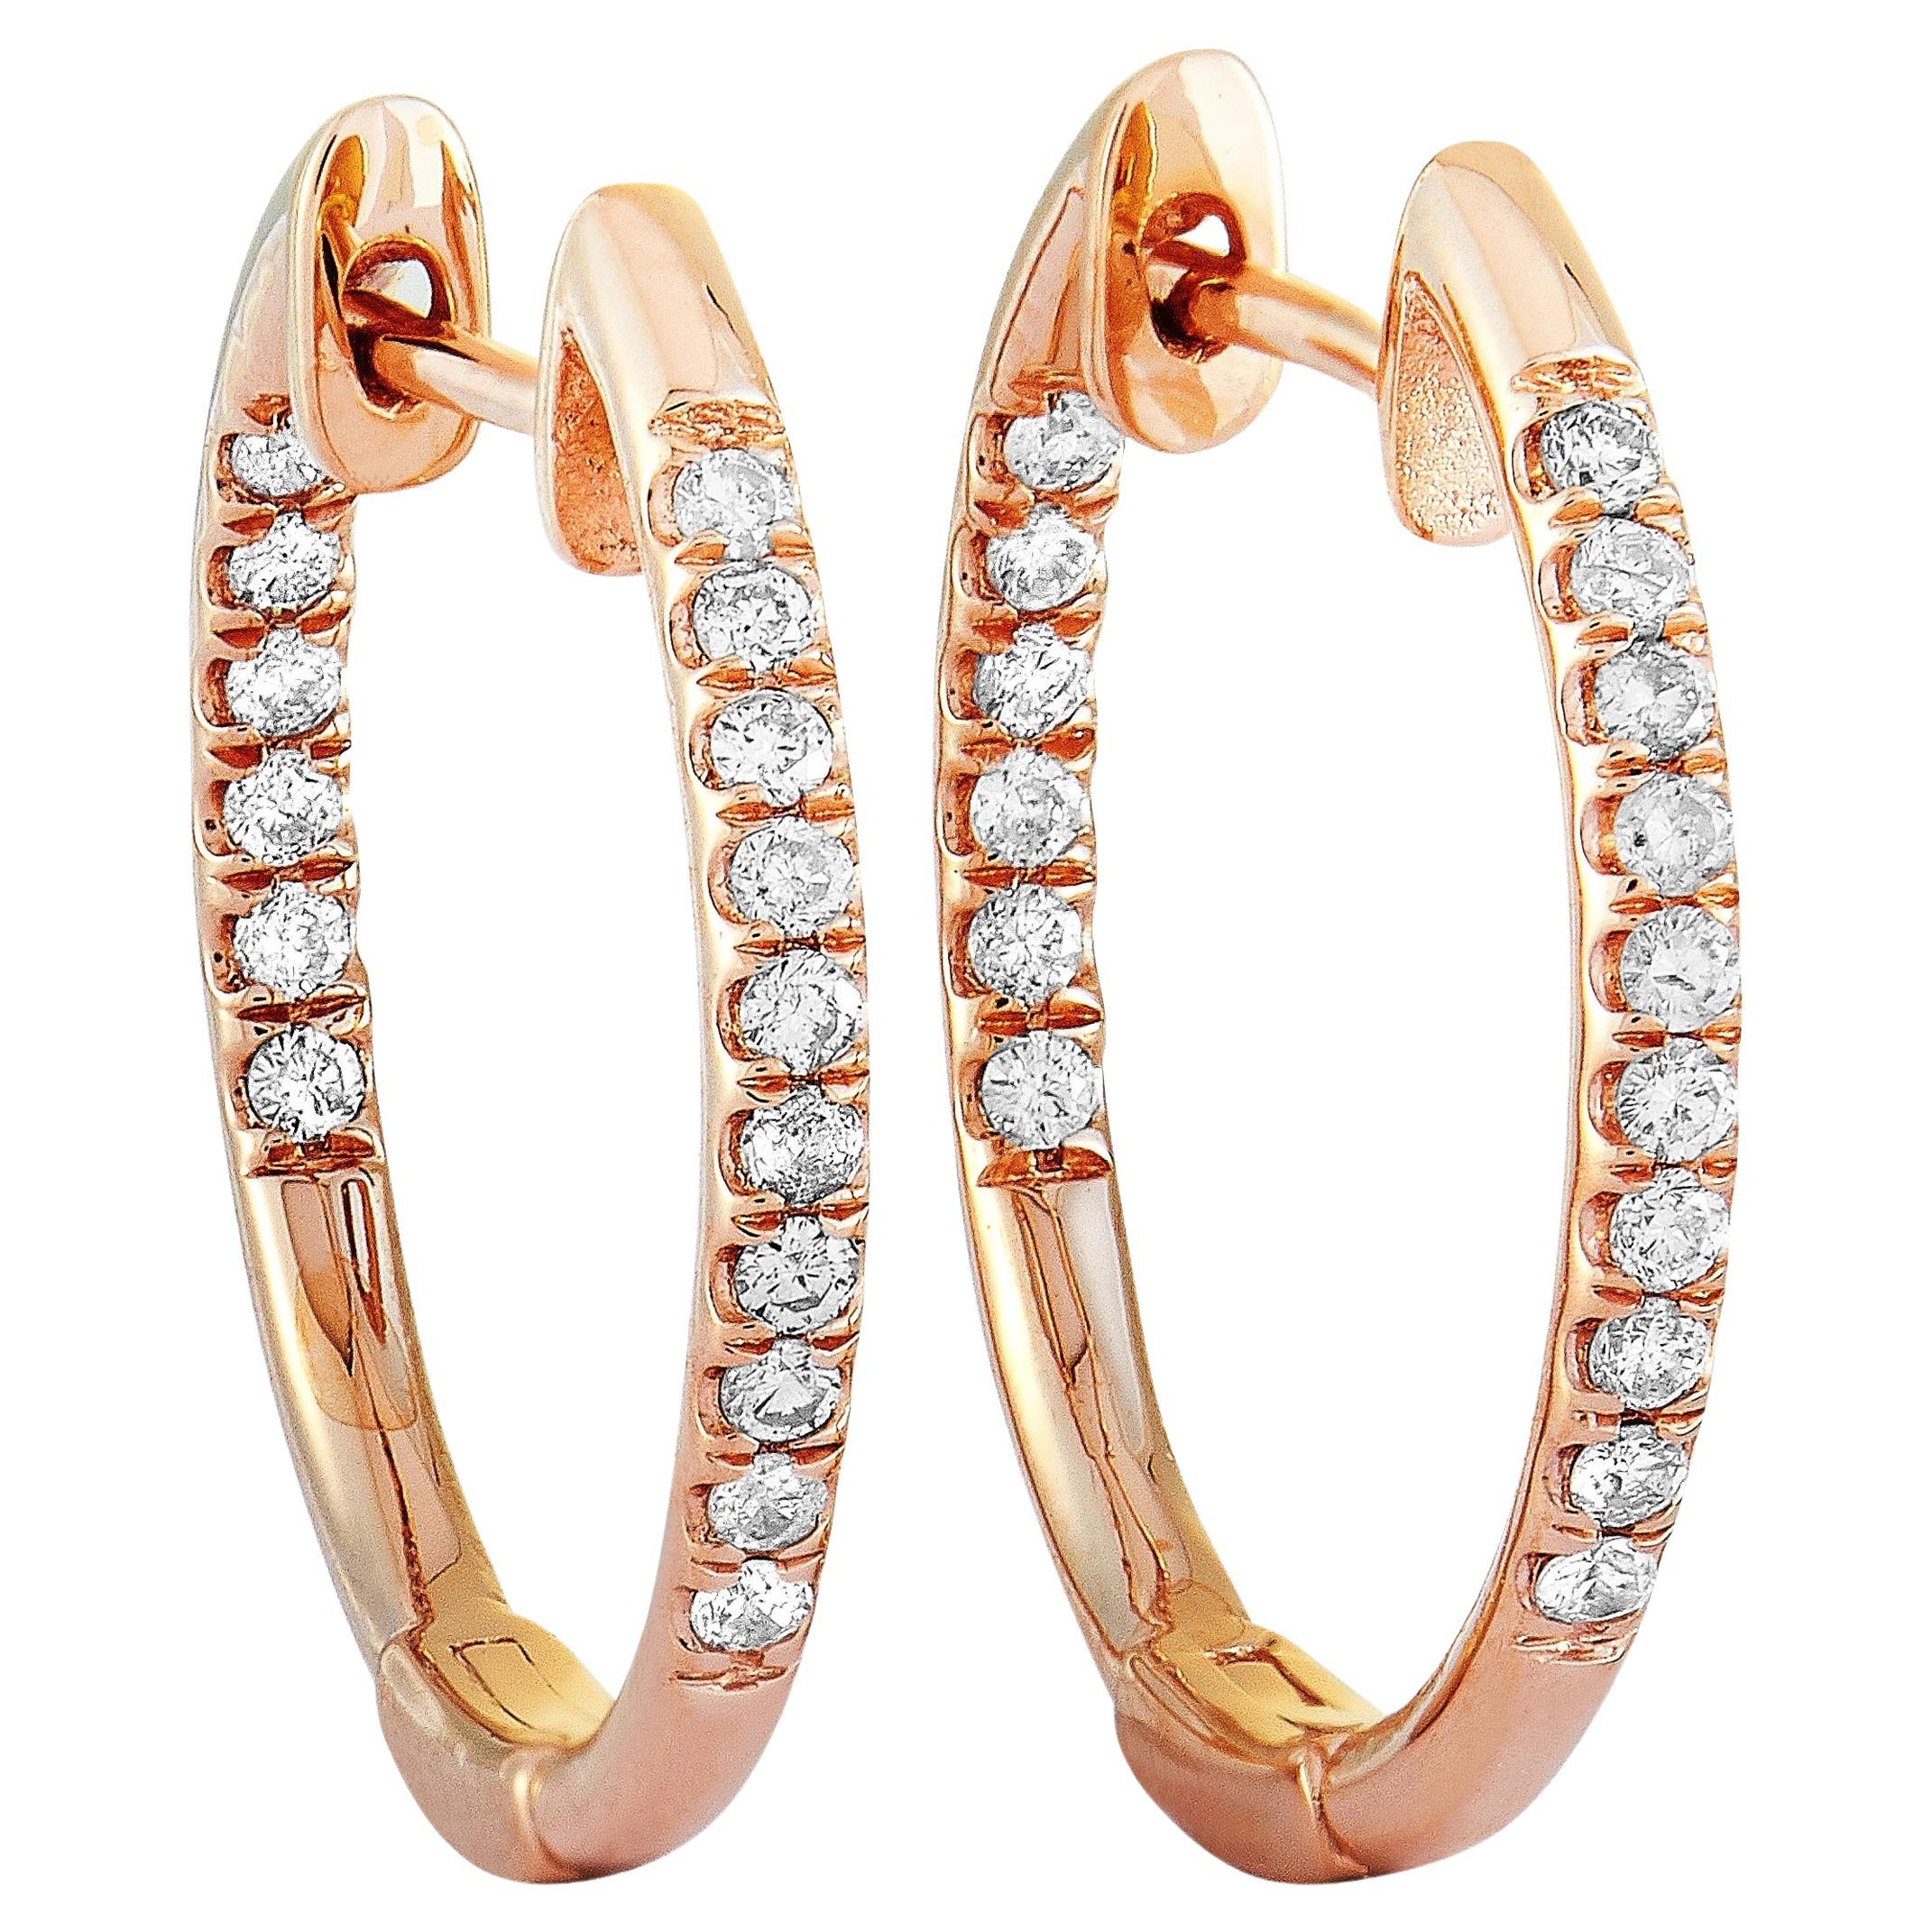 LB Exclusive 14K Rose Gold 0.25 ct Diamond Pave Hoop Earrings For Sale